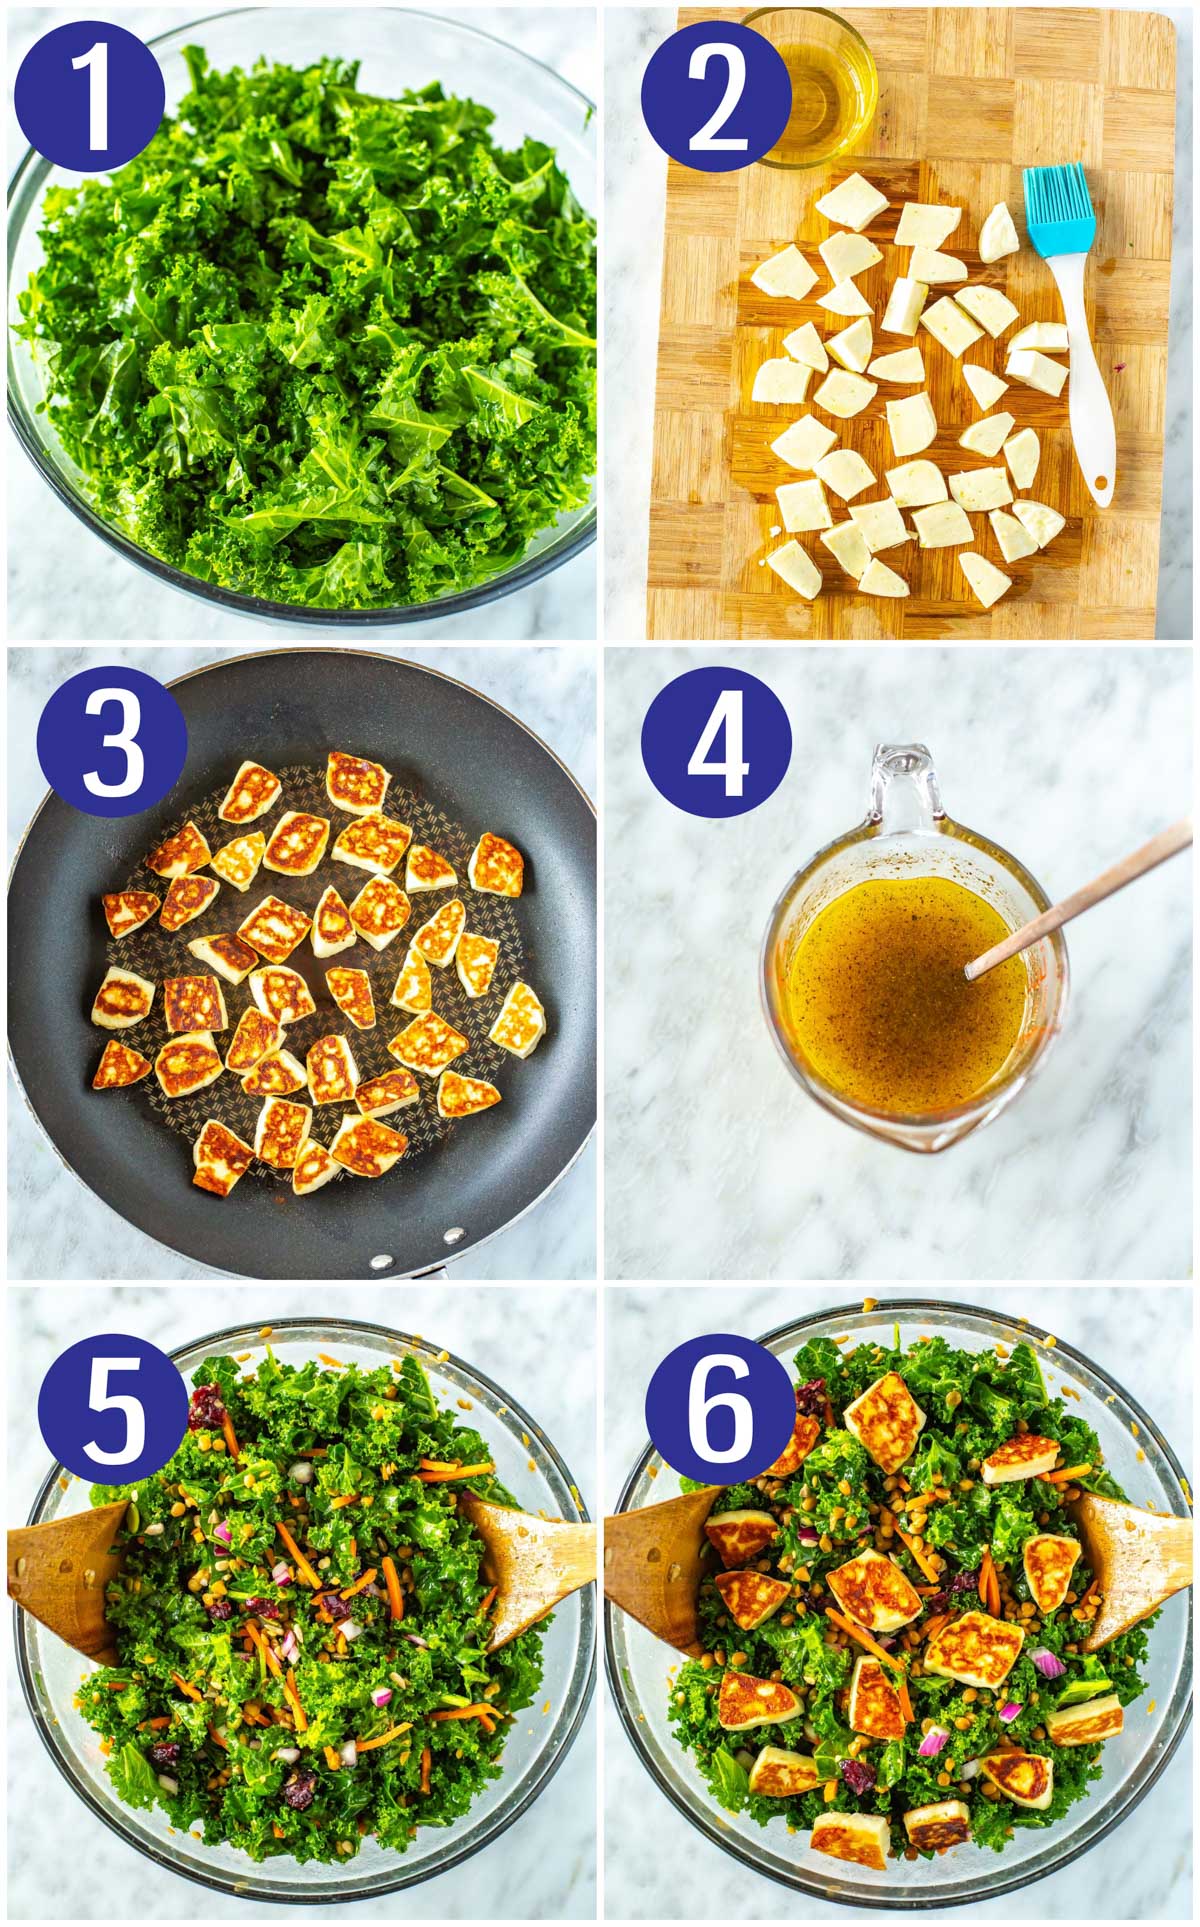 Step-by-step collage for making kale salad: wash, dry and massage kale, brush halloumi with olive oil, cook halloumi, make dressing, mix salad, top with cooked halloumi.